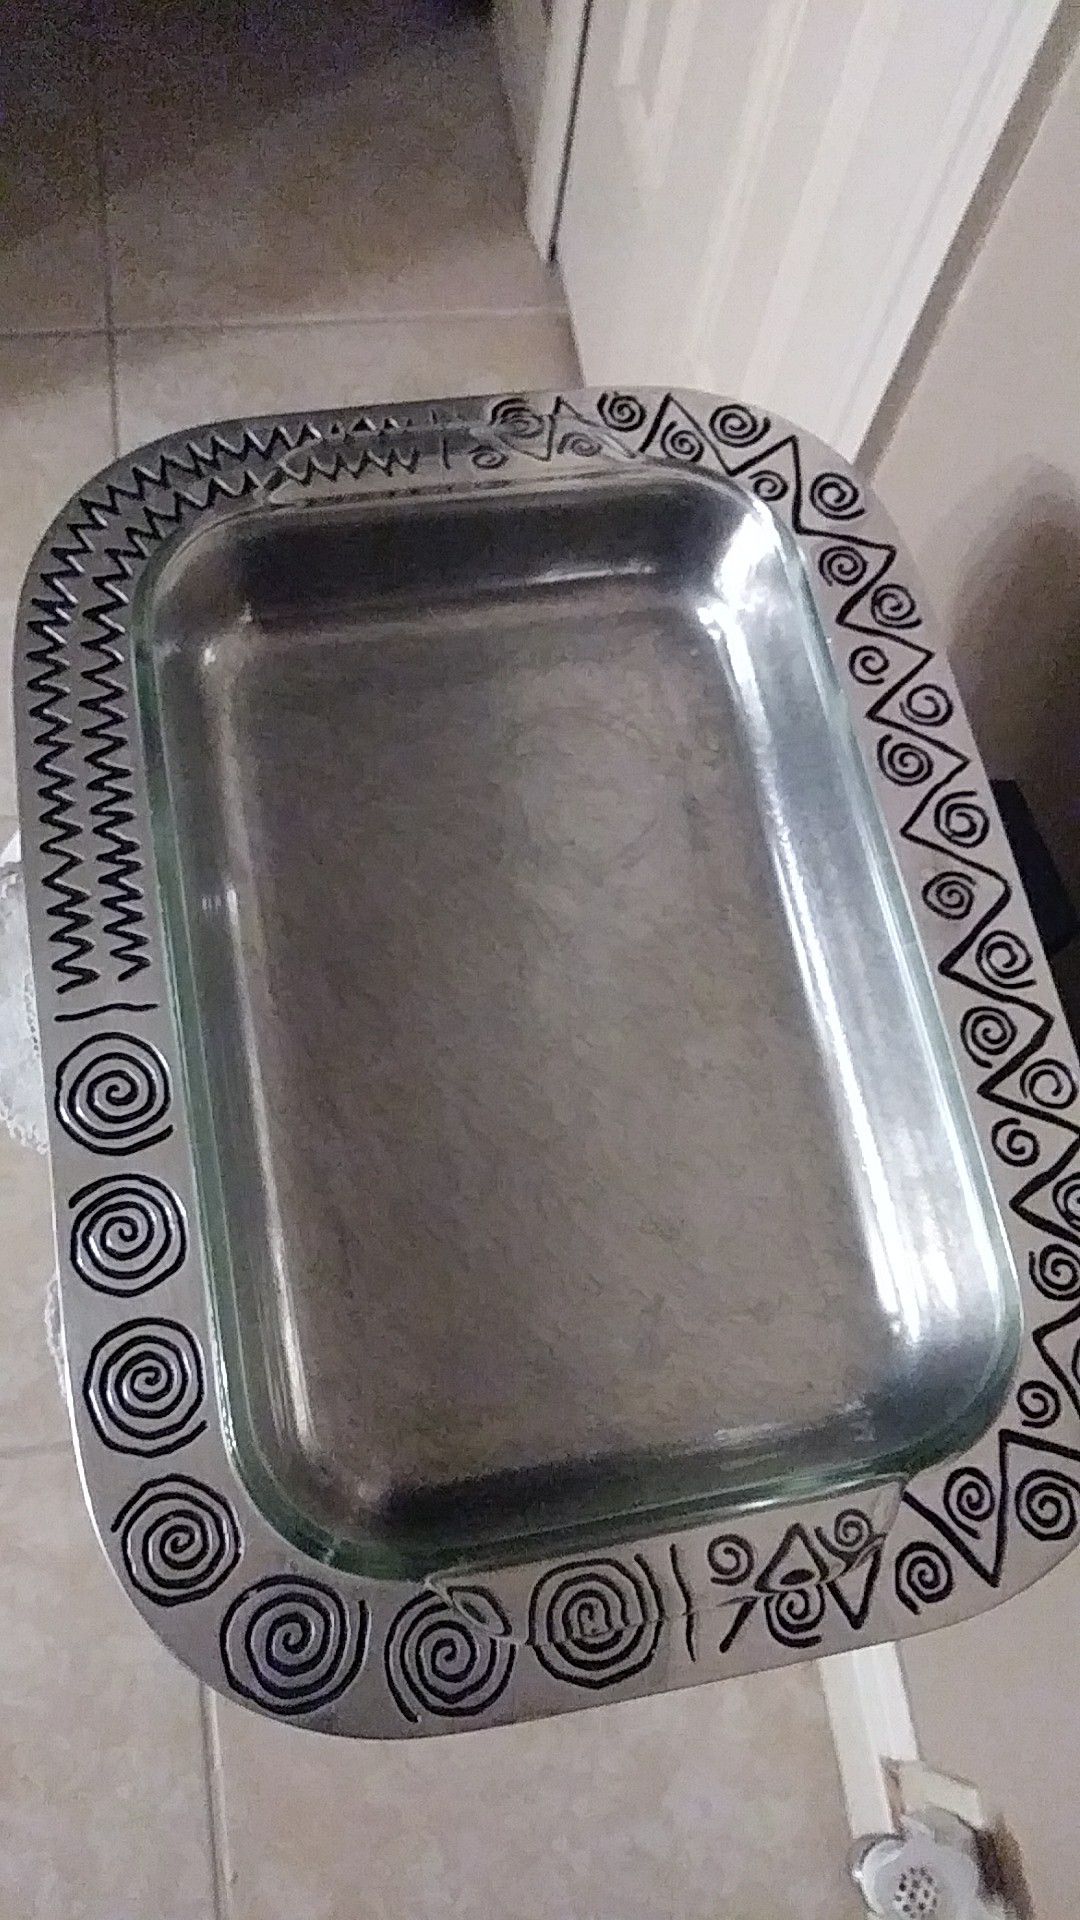 Pewter serving dish with Pyrex Thanksgiving